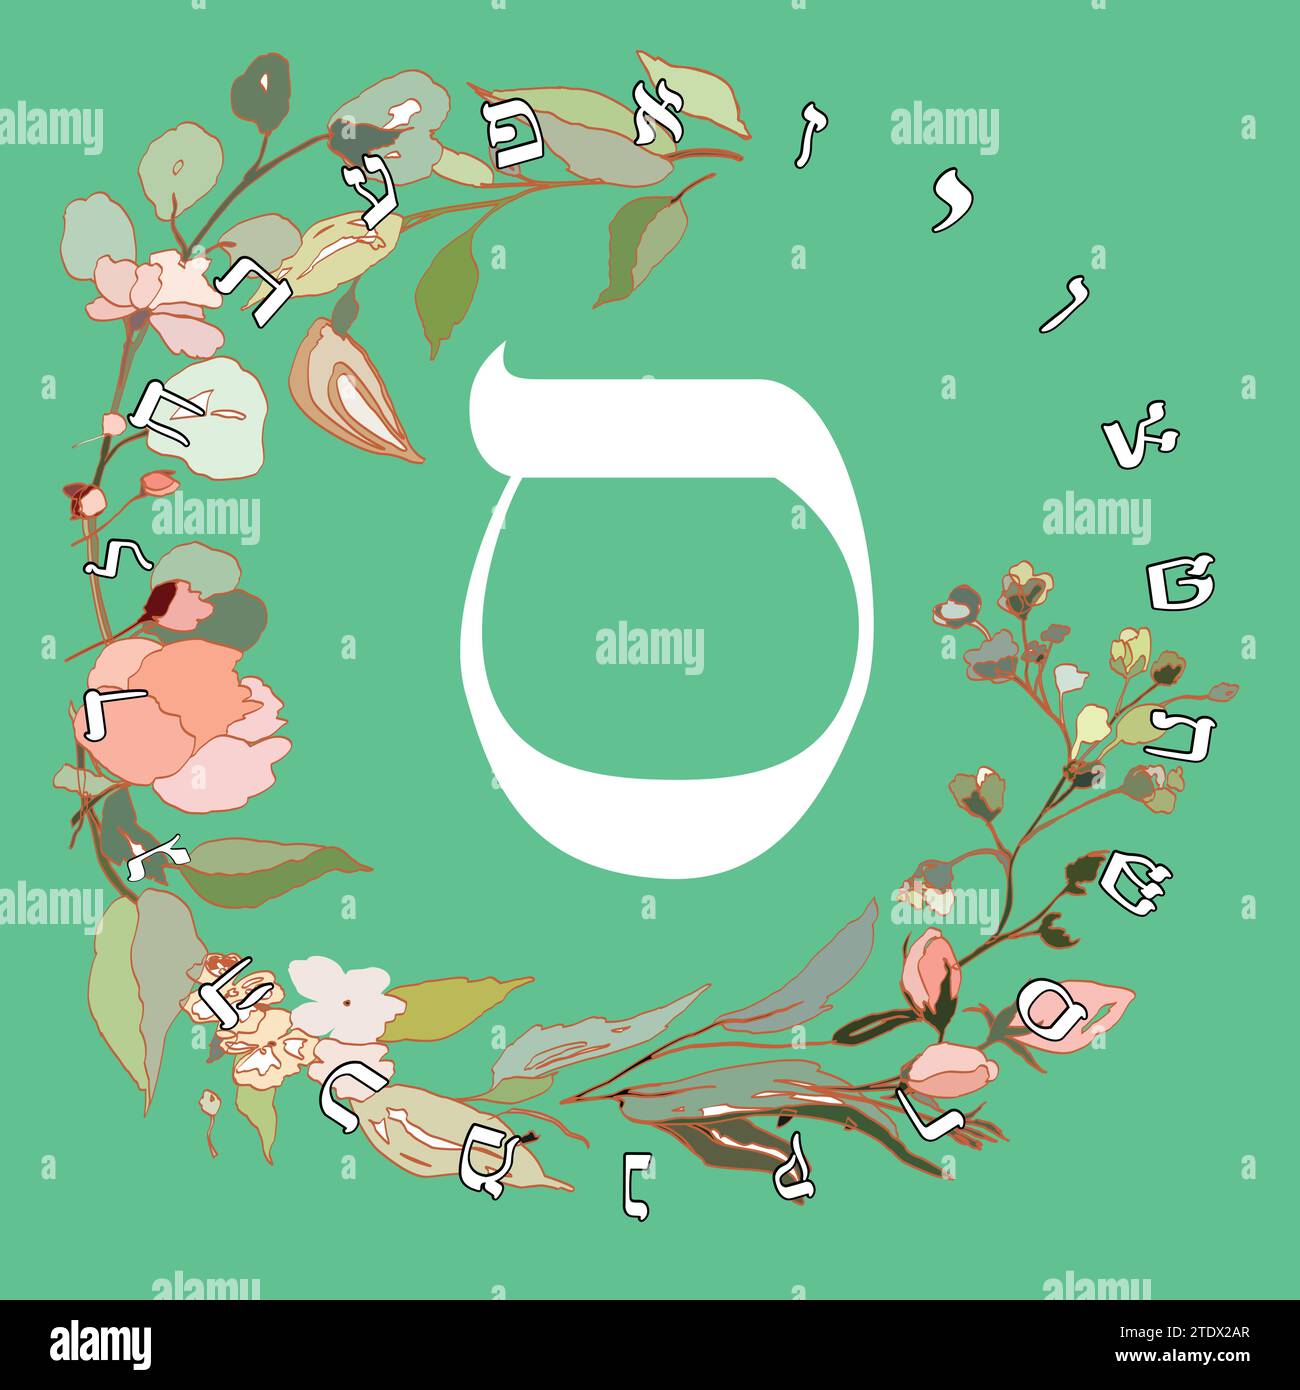 Vector illustration of the Hebrew alphabet with floral design. Hebrew letter called Samekh white on green background. Stock Vector